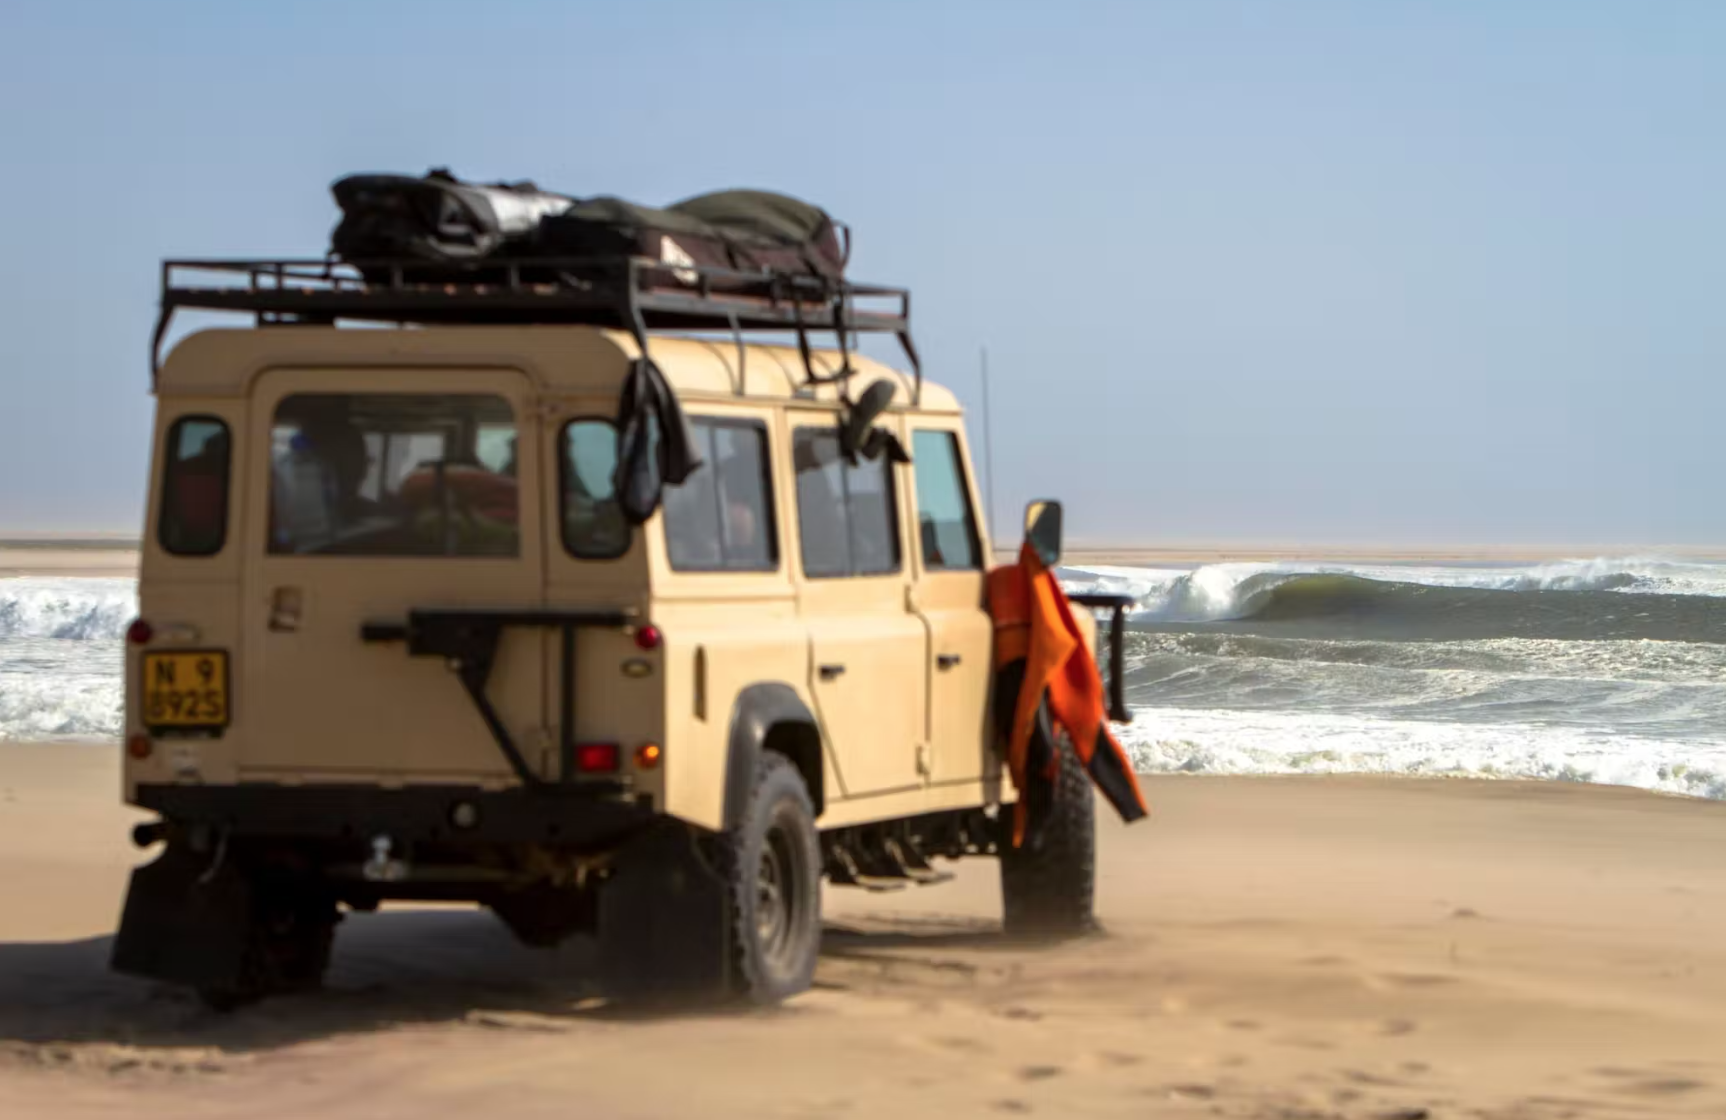 skeleton bay, namibia, one of the best surf destinations of july